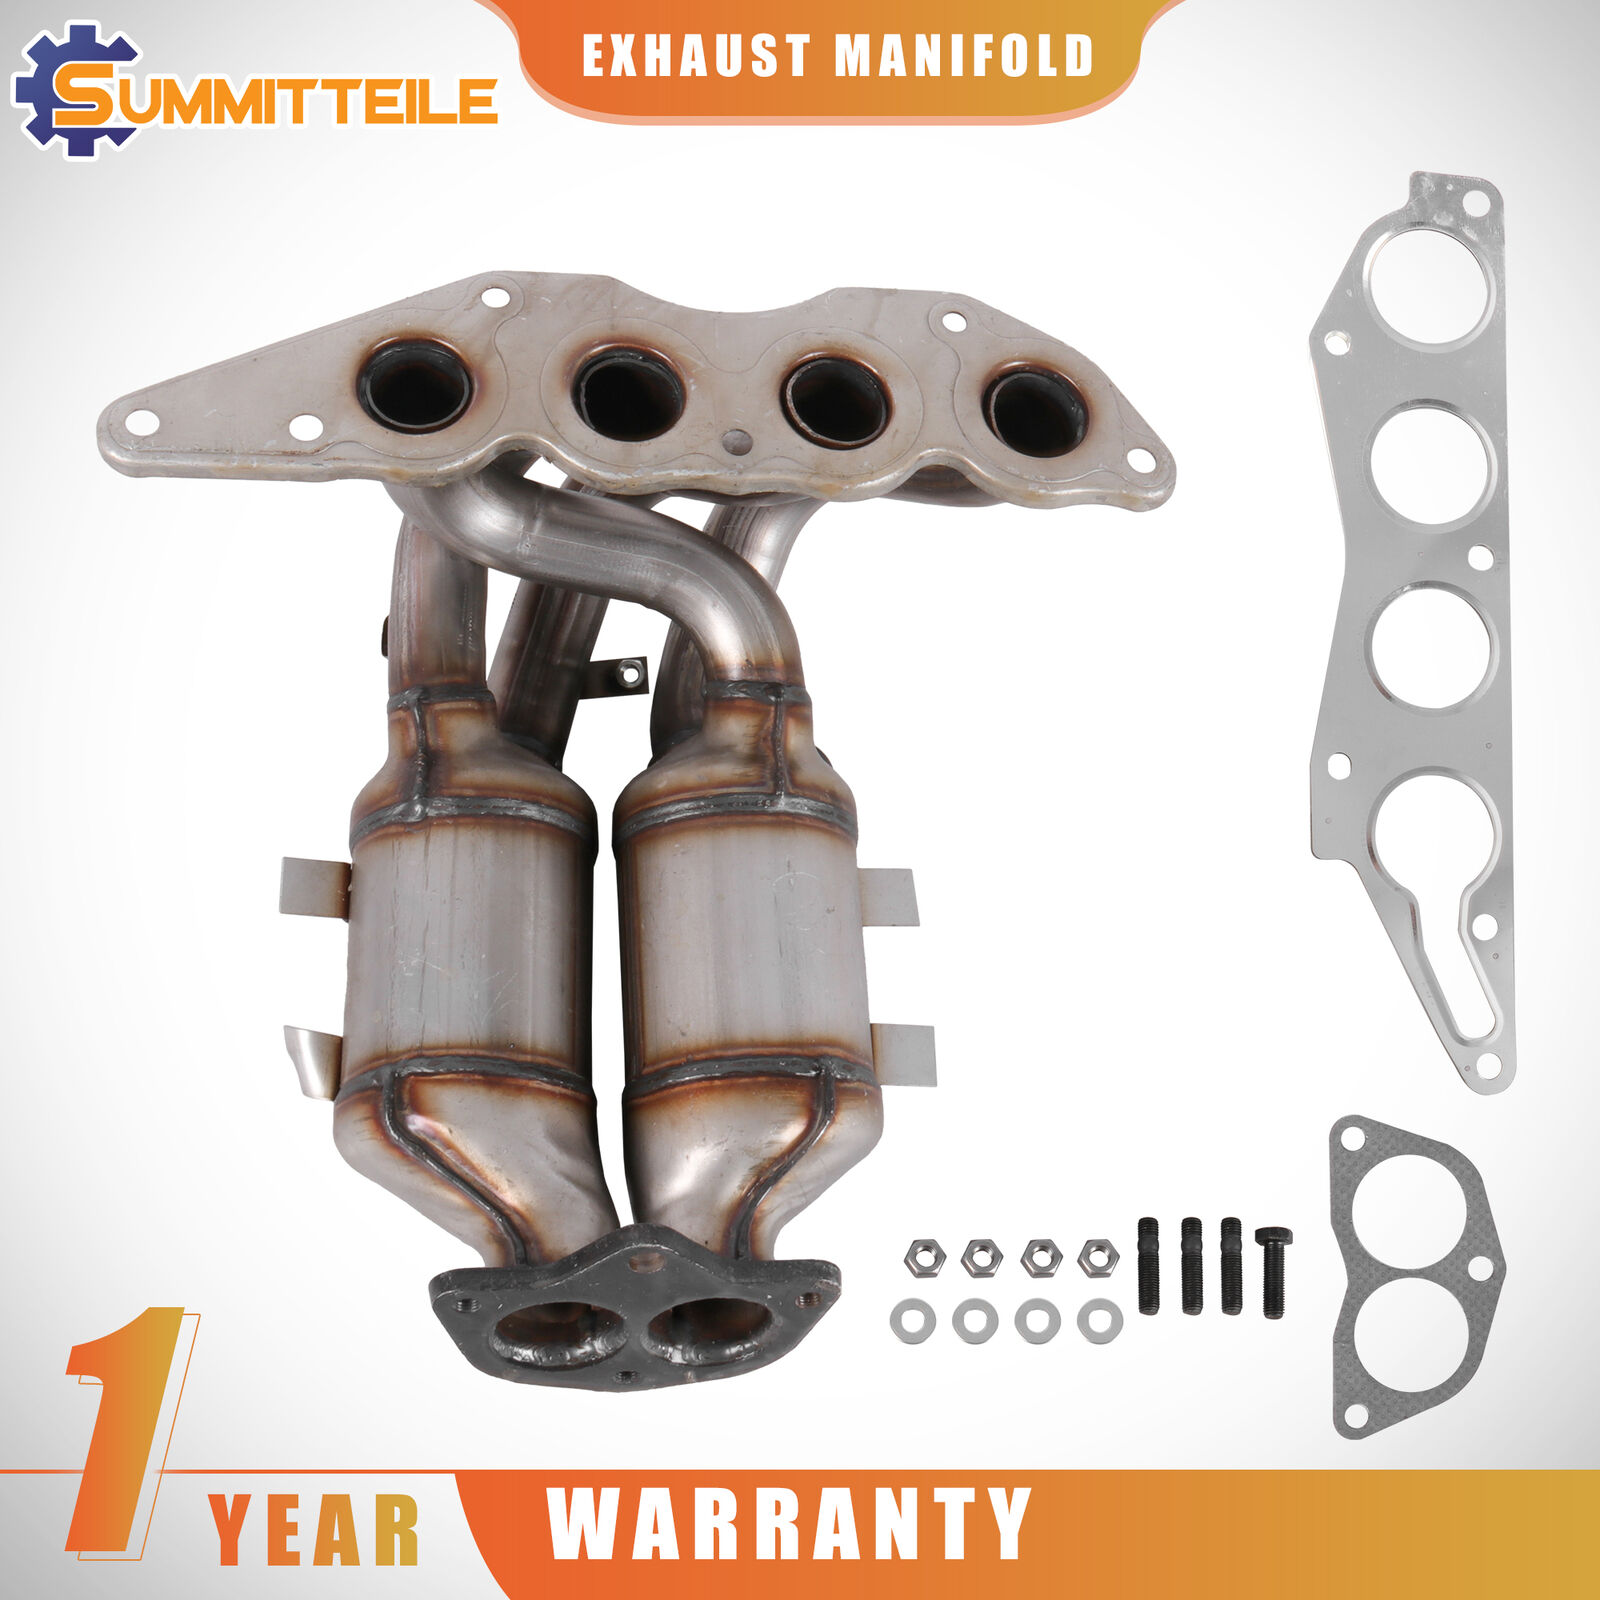 Front Exhaust Manifold Catalytic Converter For 04-12 Mitsubishi Galant 2.4L